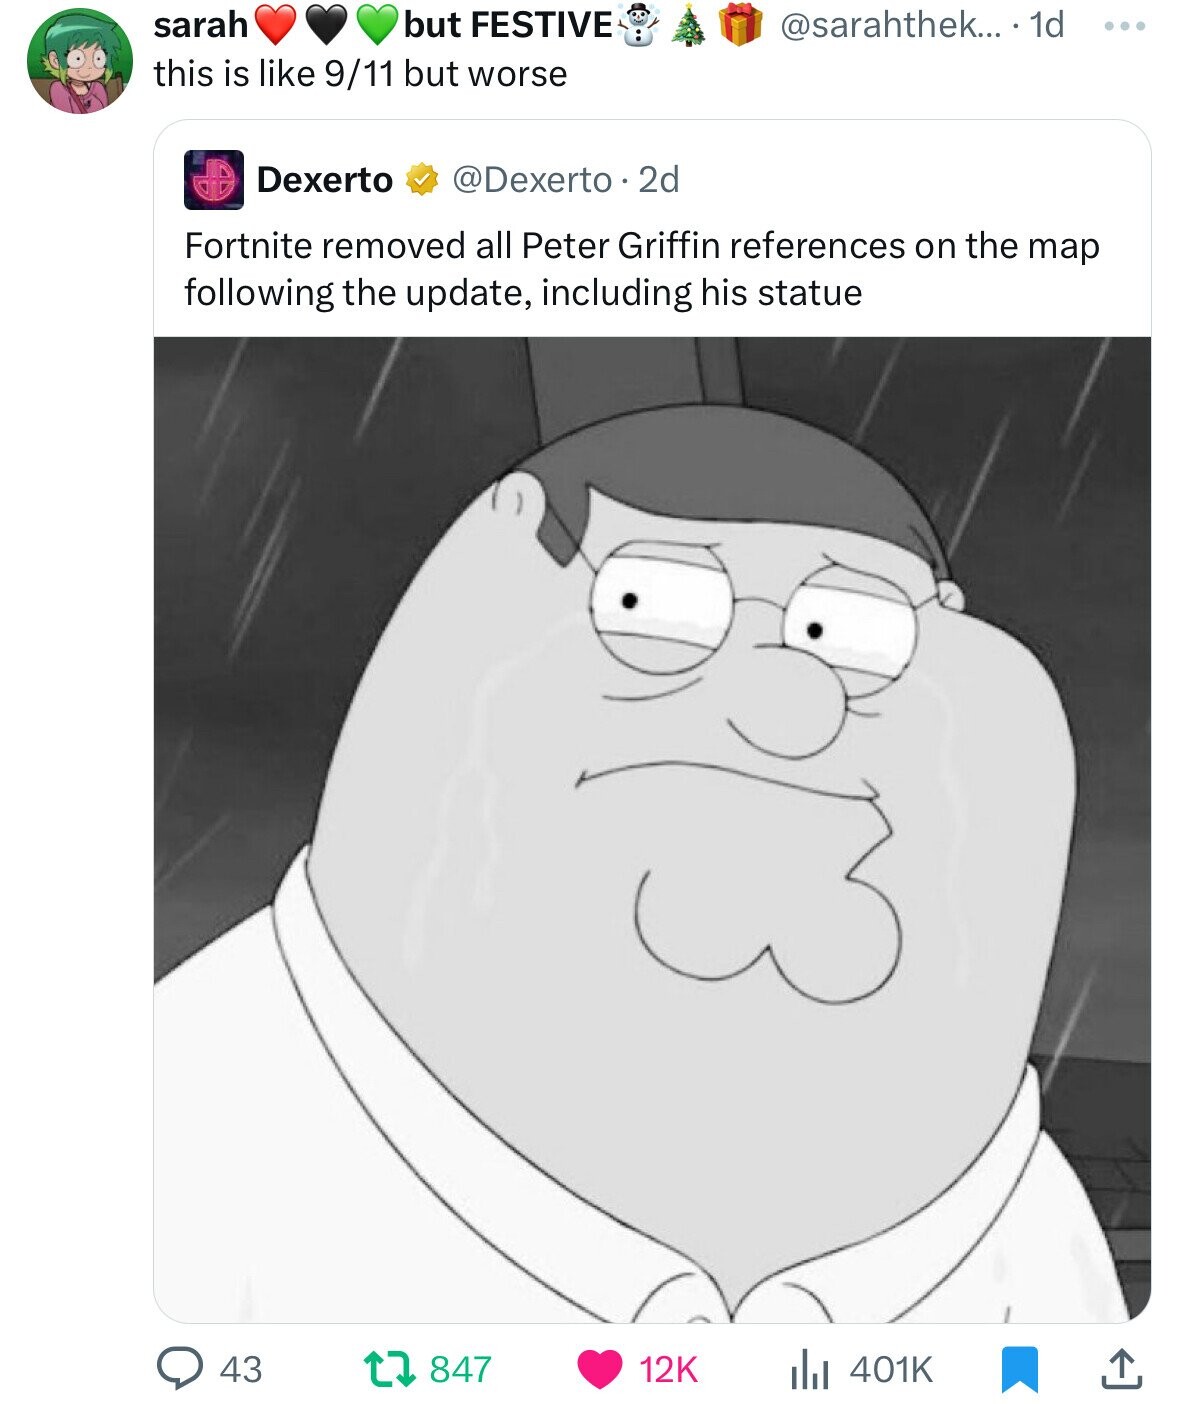 cartoon - but Festive this is 911 but worse sarah ... 1d Dexerto 2d Fortnite removed all Peter Griffin references on the map ing the update, including his statue 13 43 t7 Ilil